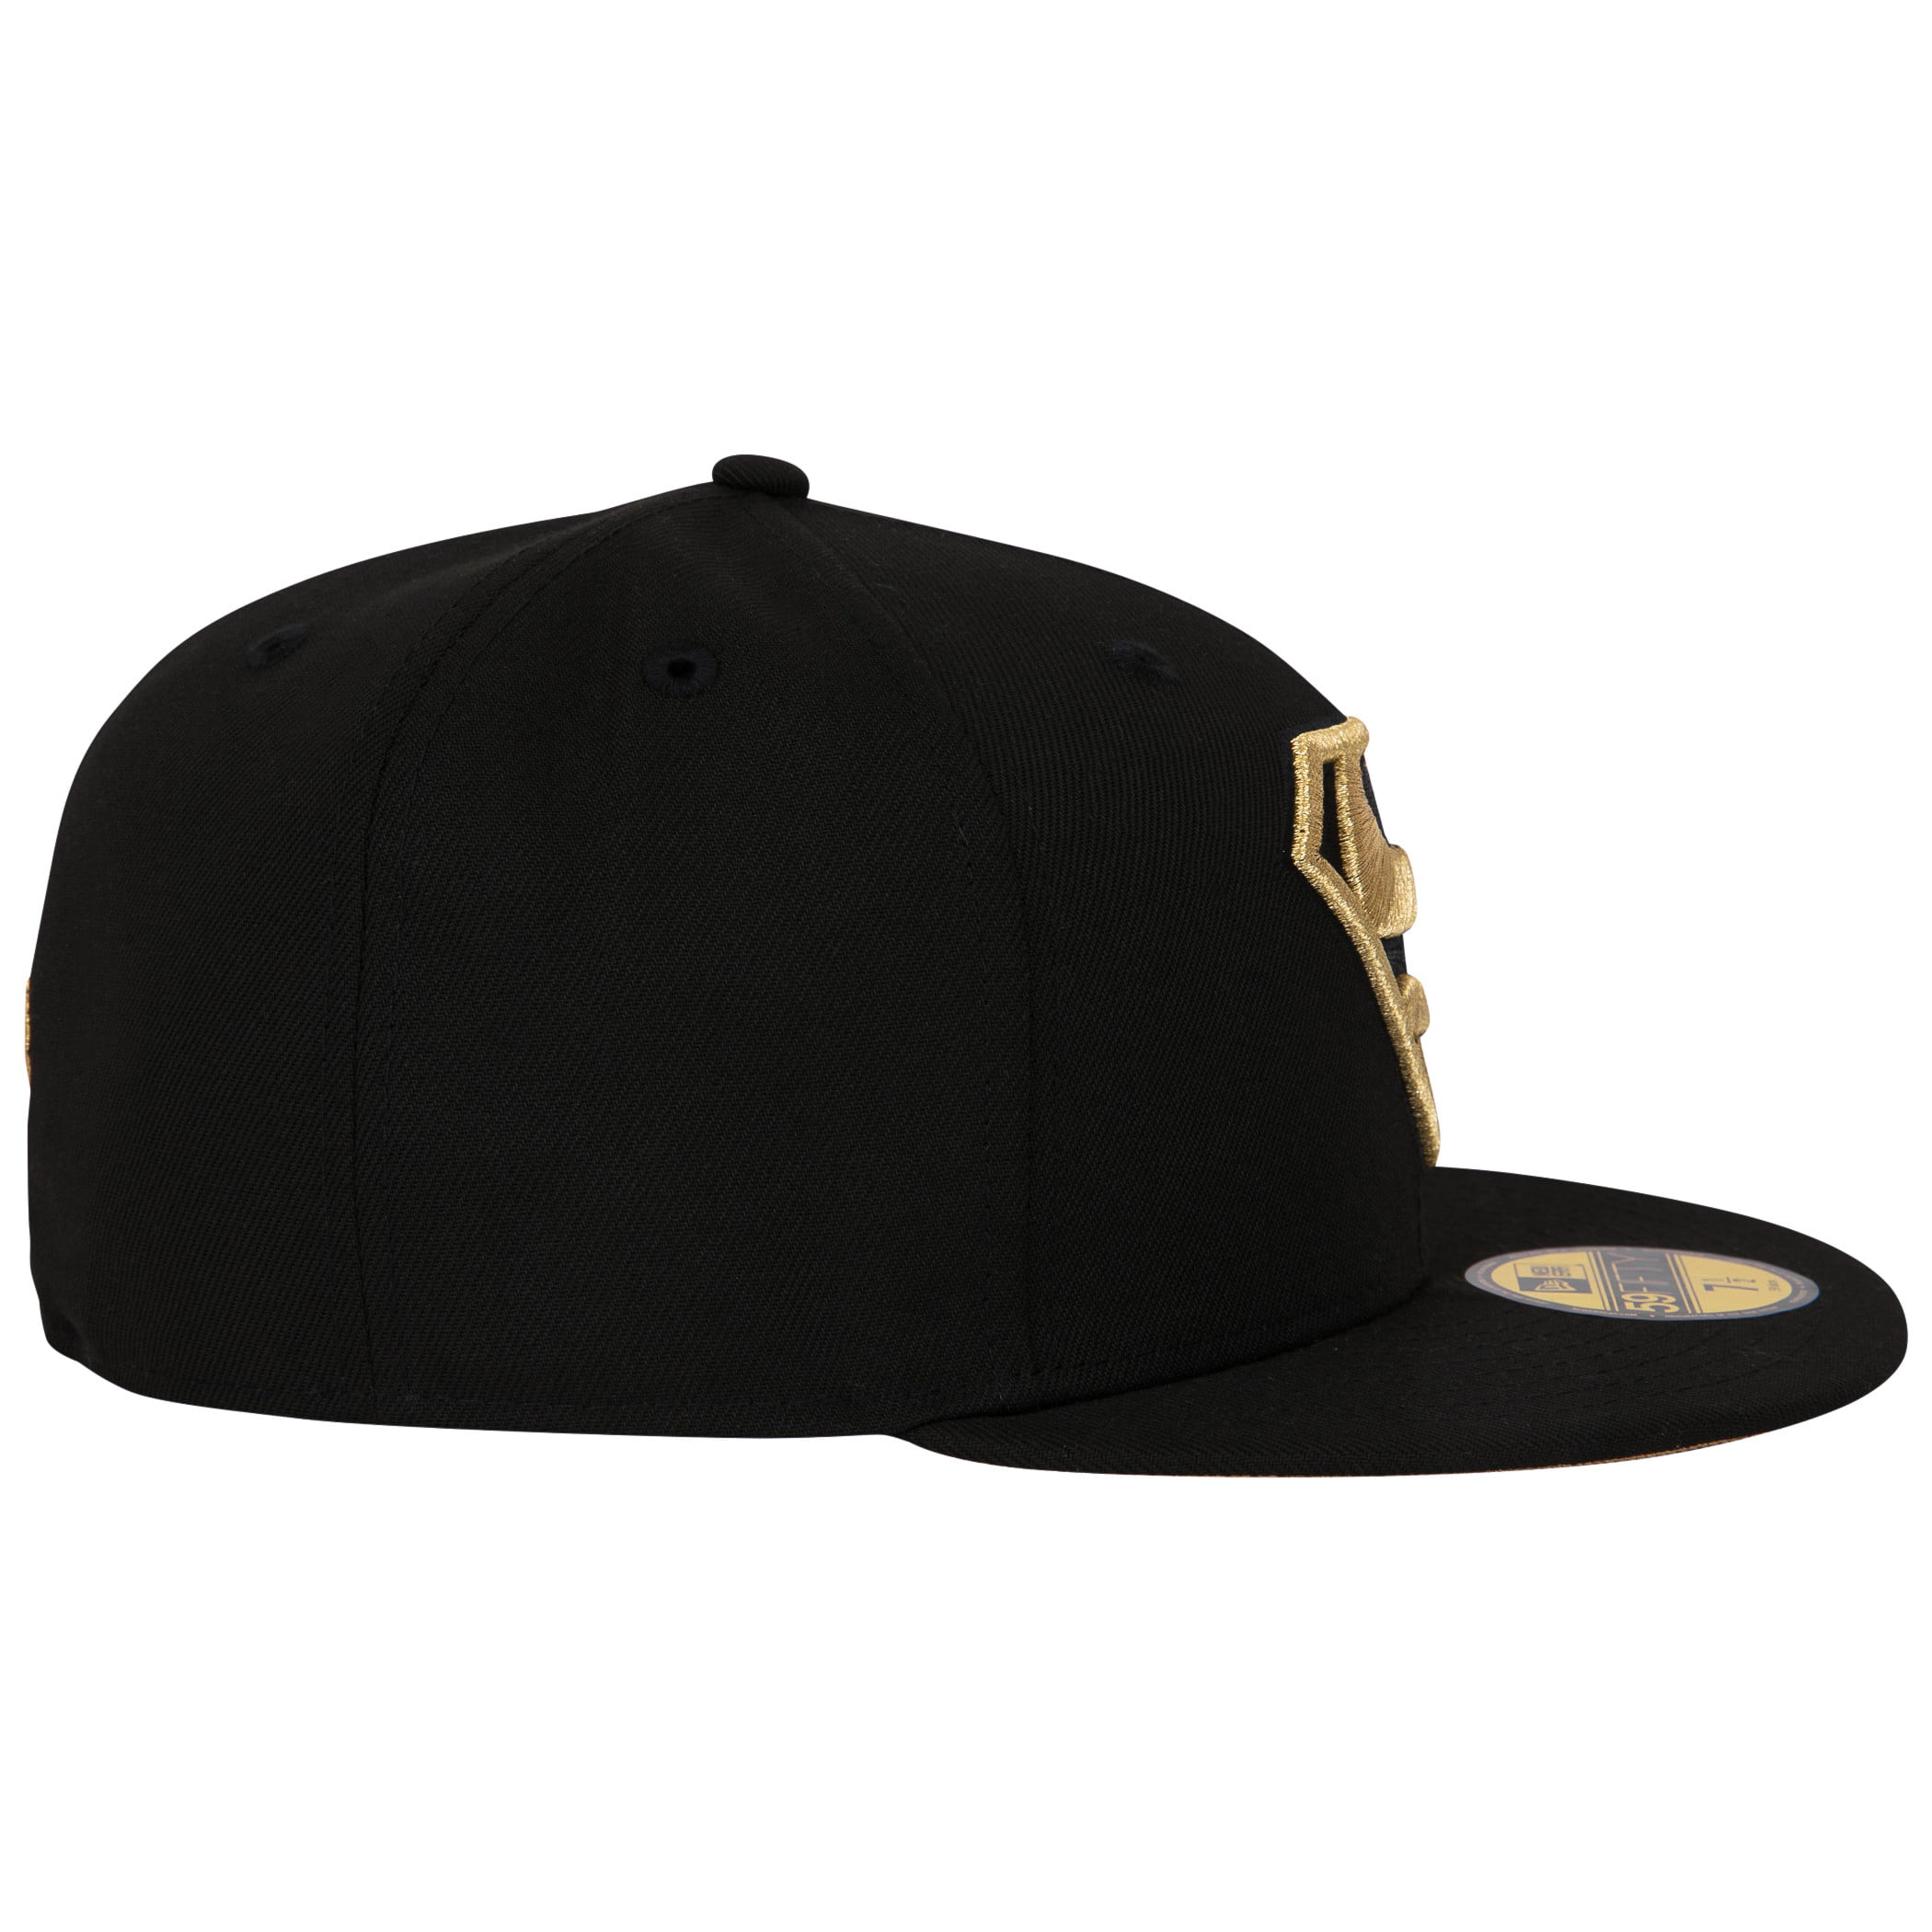 Superman Gold Logo Black Colorway New Era 59Fifty Fitted Hat-7 1/4 